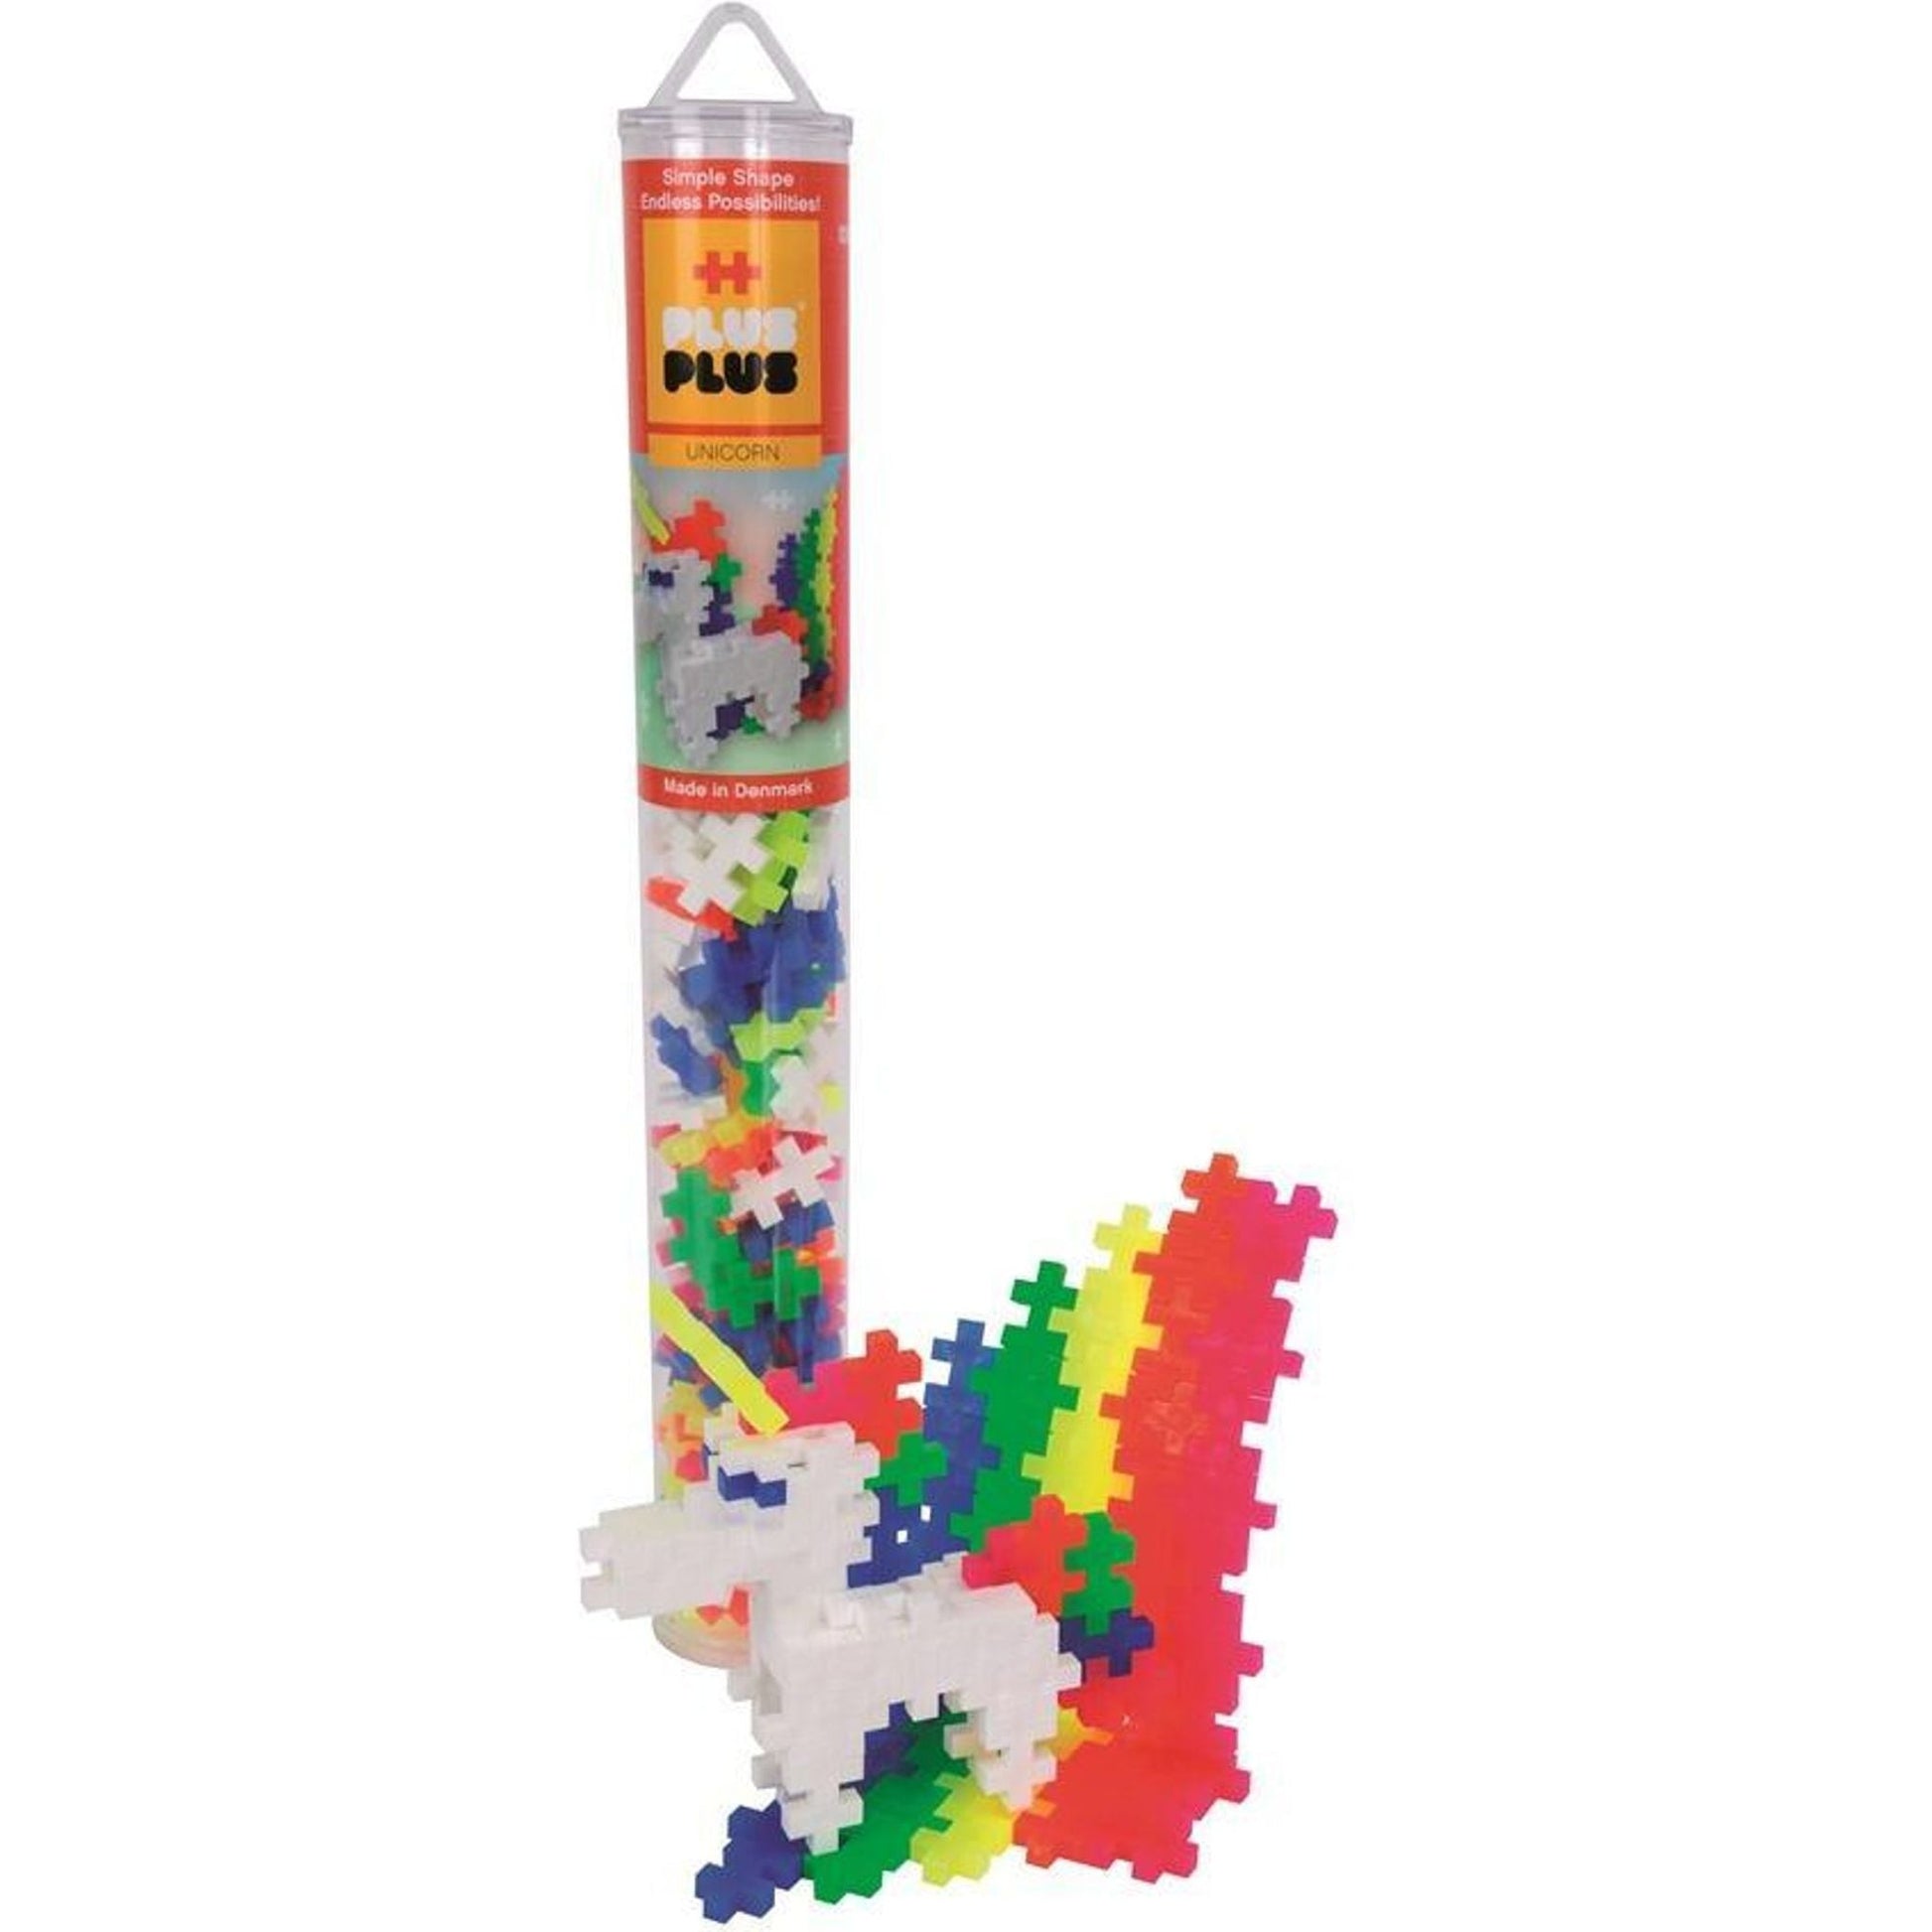 Plus Plus: 100 Piece Tube (7 Different Models to choose from!) - Toybox Tales